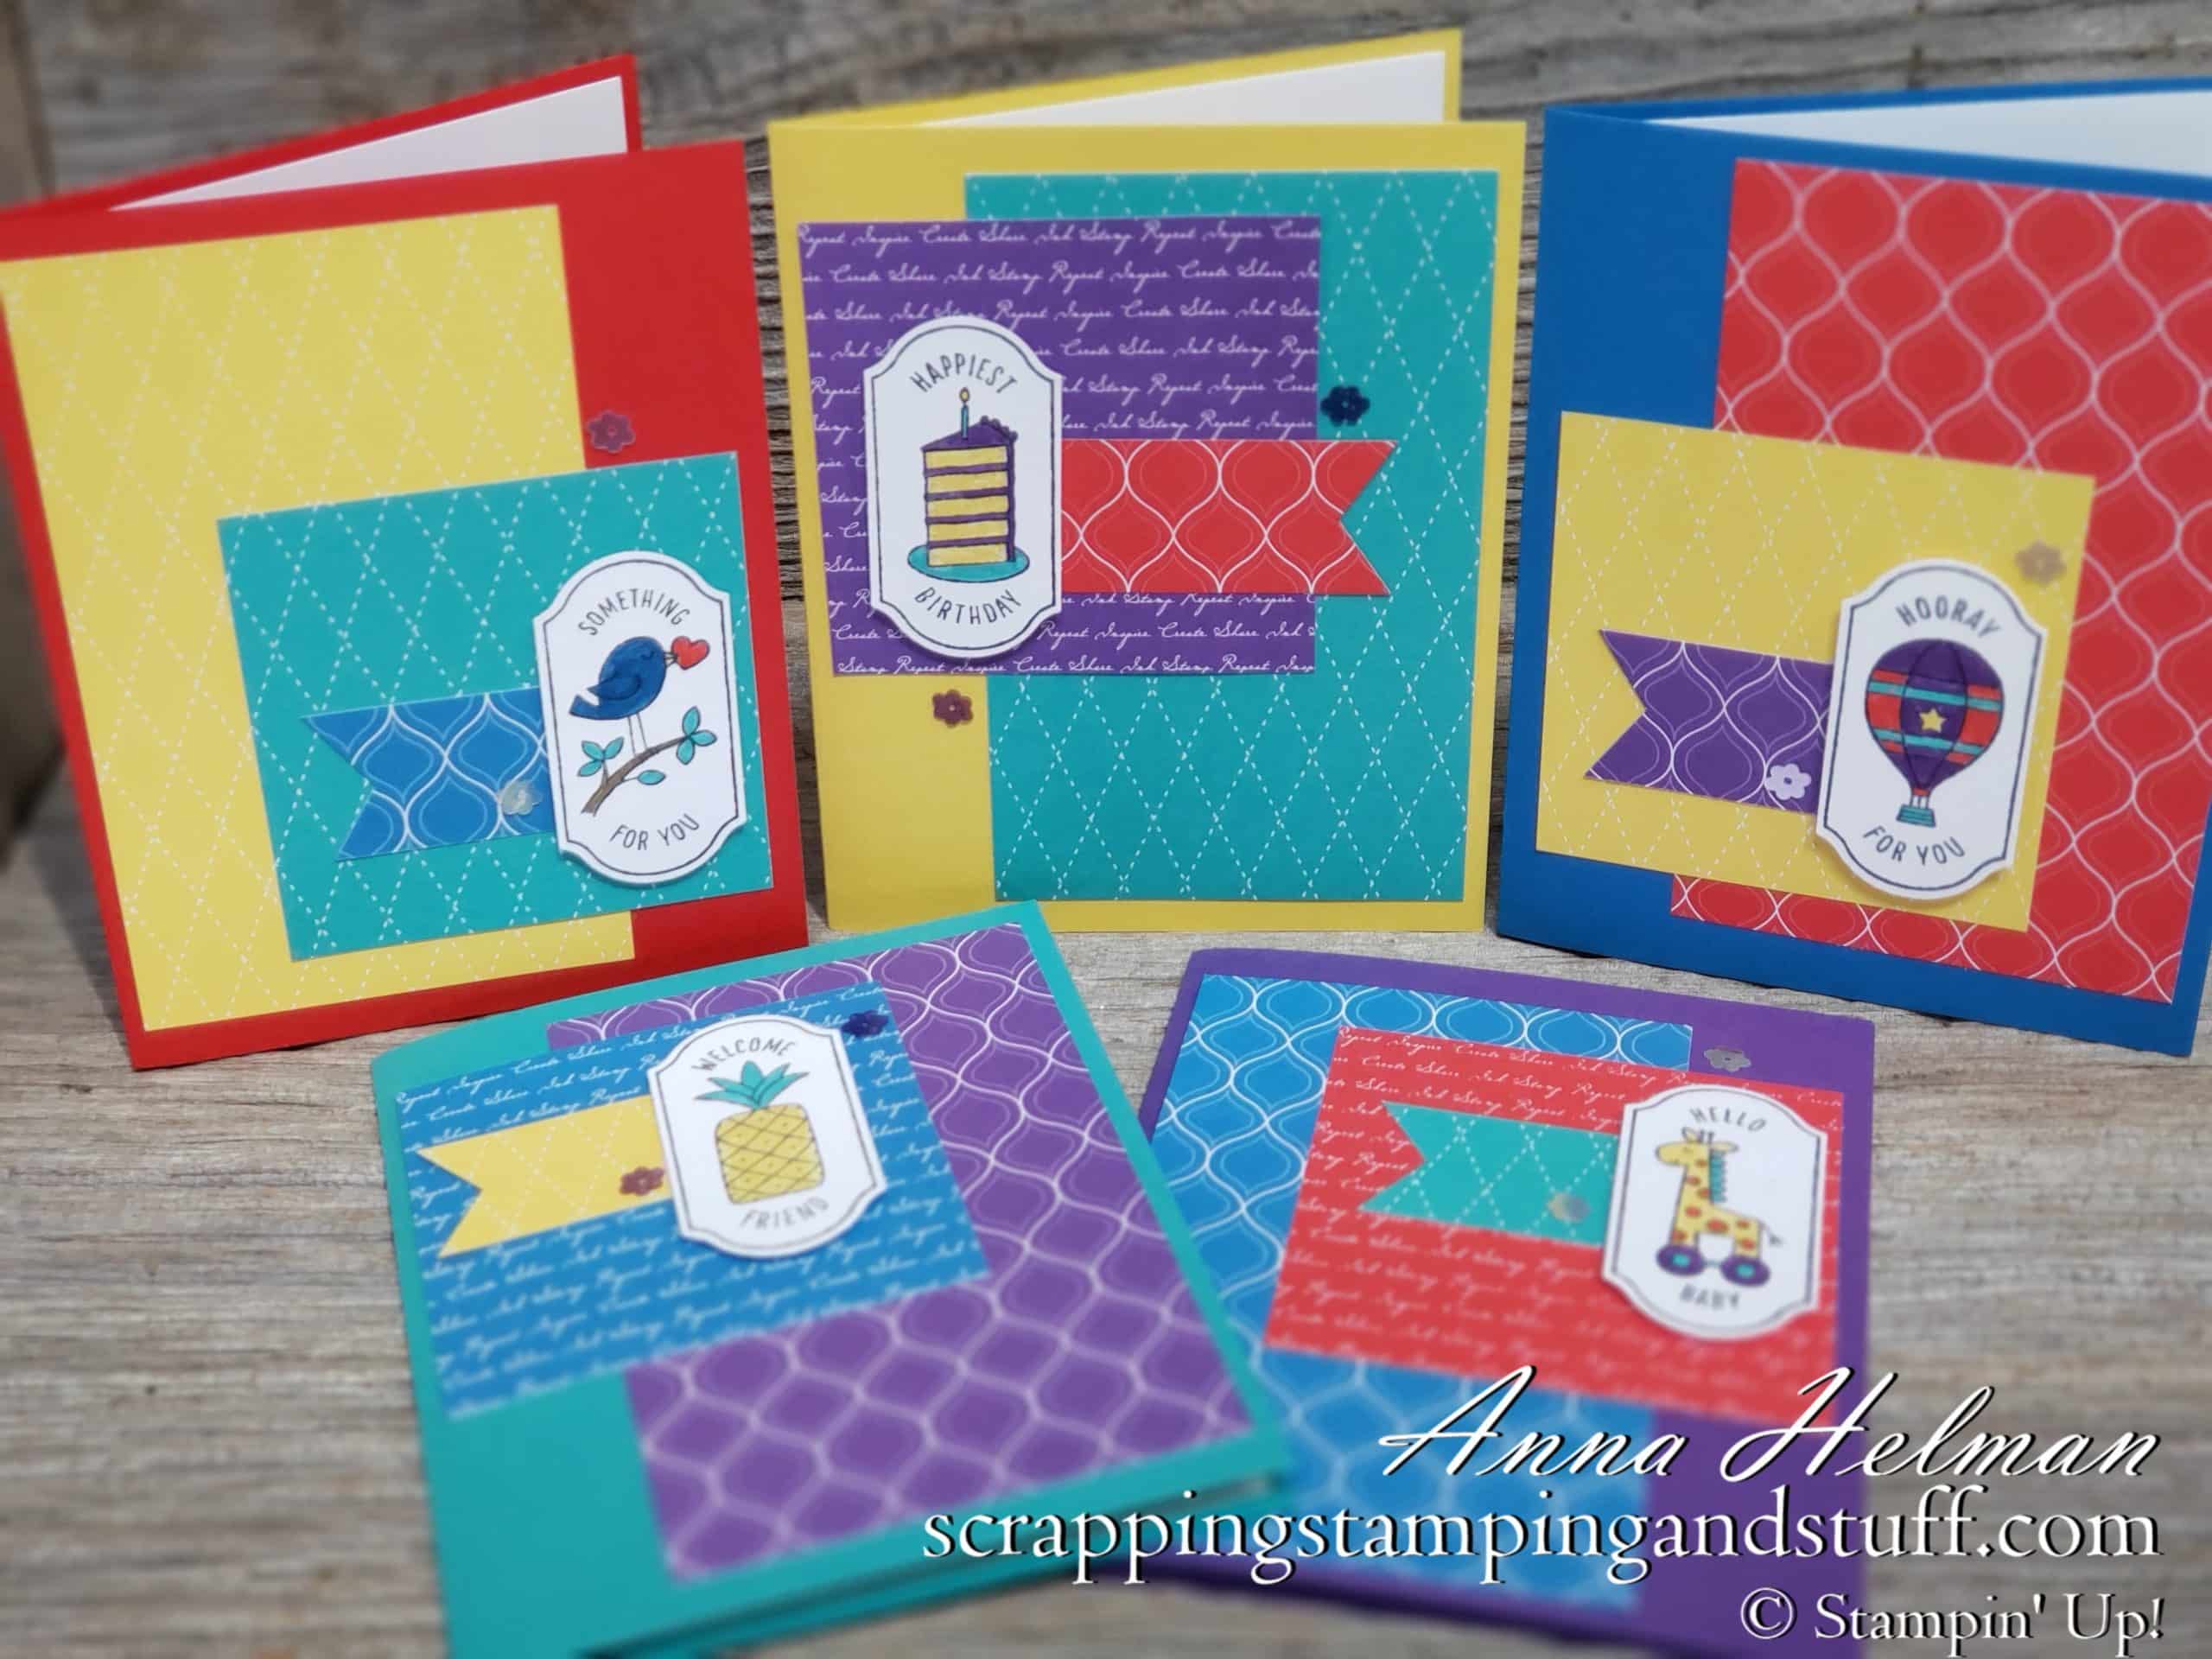 Today’s Giveaway – Stampin Up Time For Tags